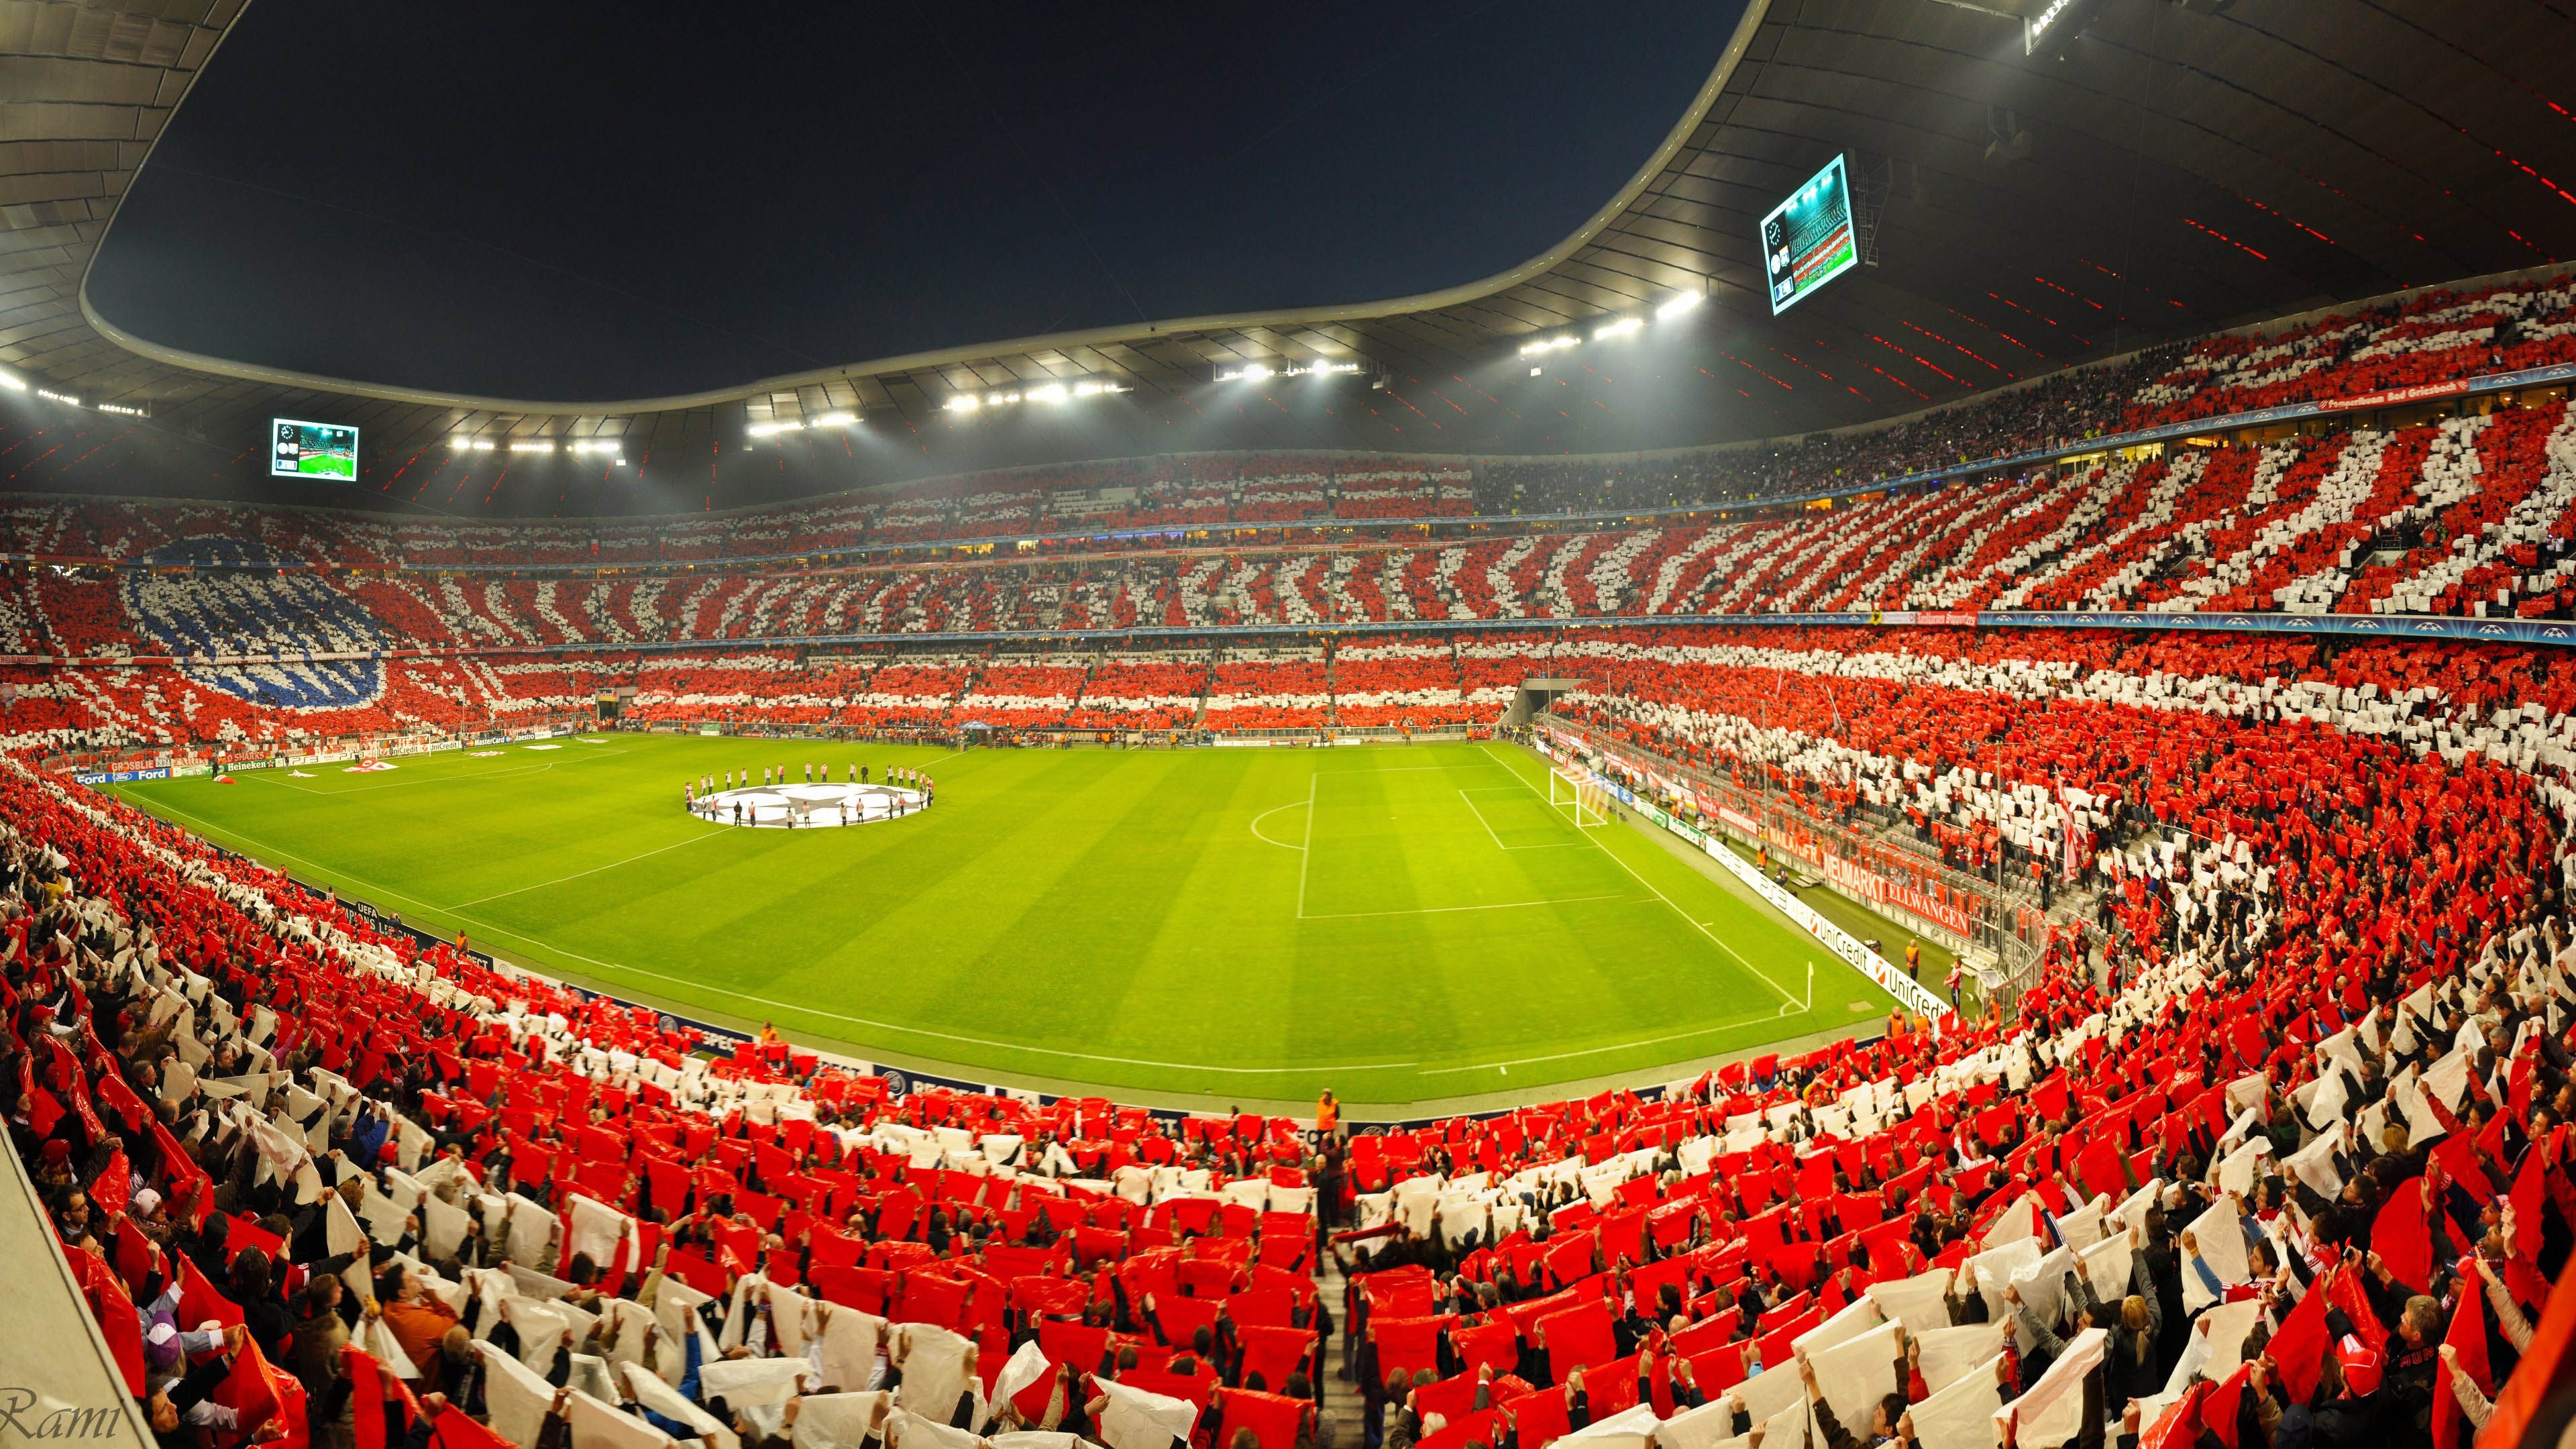 Bayern Munchen FC: Allianz Arena, A football stadium with a 70,000 seating capacity for international matches and 75,000 for domestic matches. 3840x2160 4K Background.